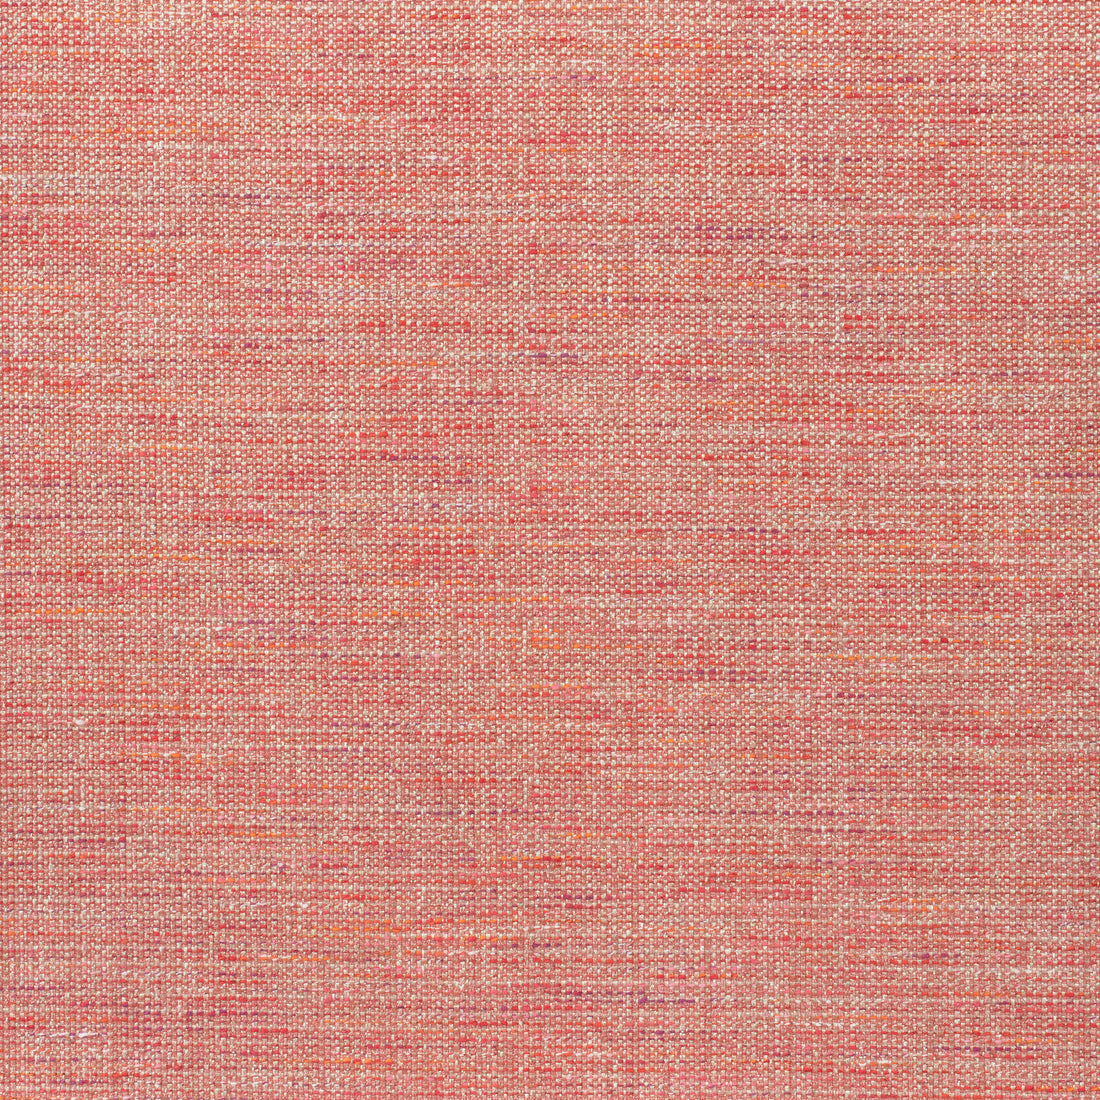 Dante fabric in coral color - pattern number W80702 - by Thibaut in the Woven Resource 11: Rialto collection